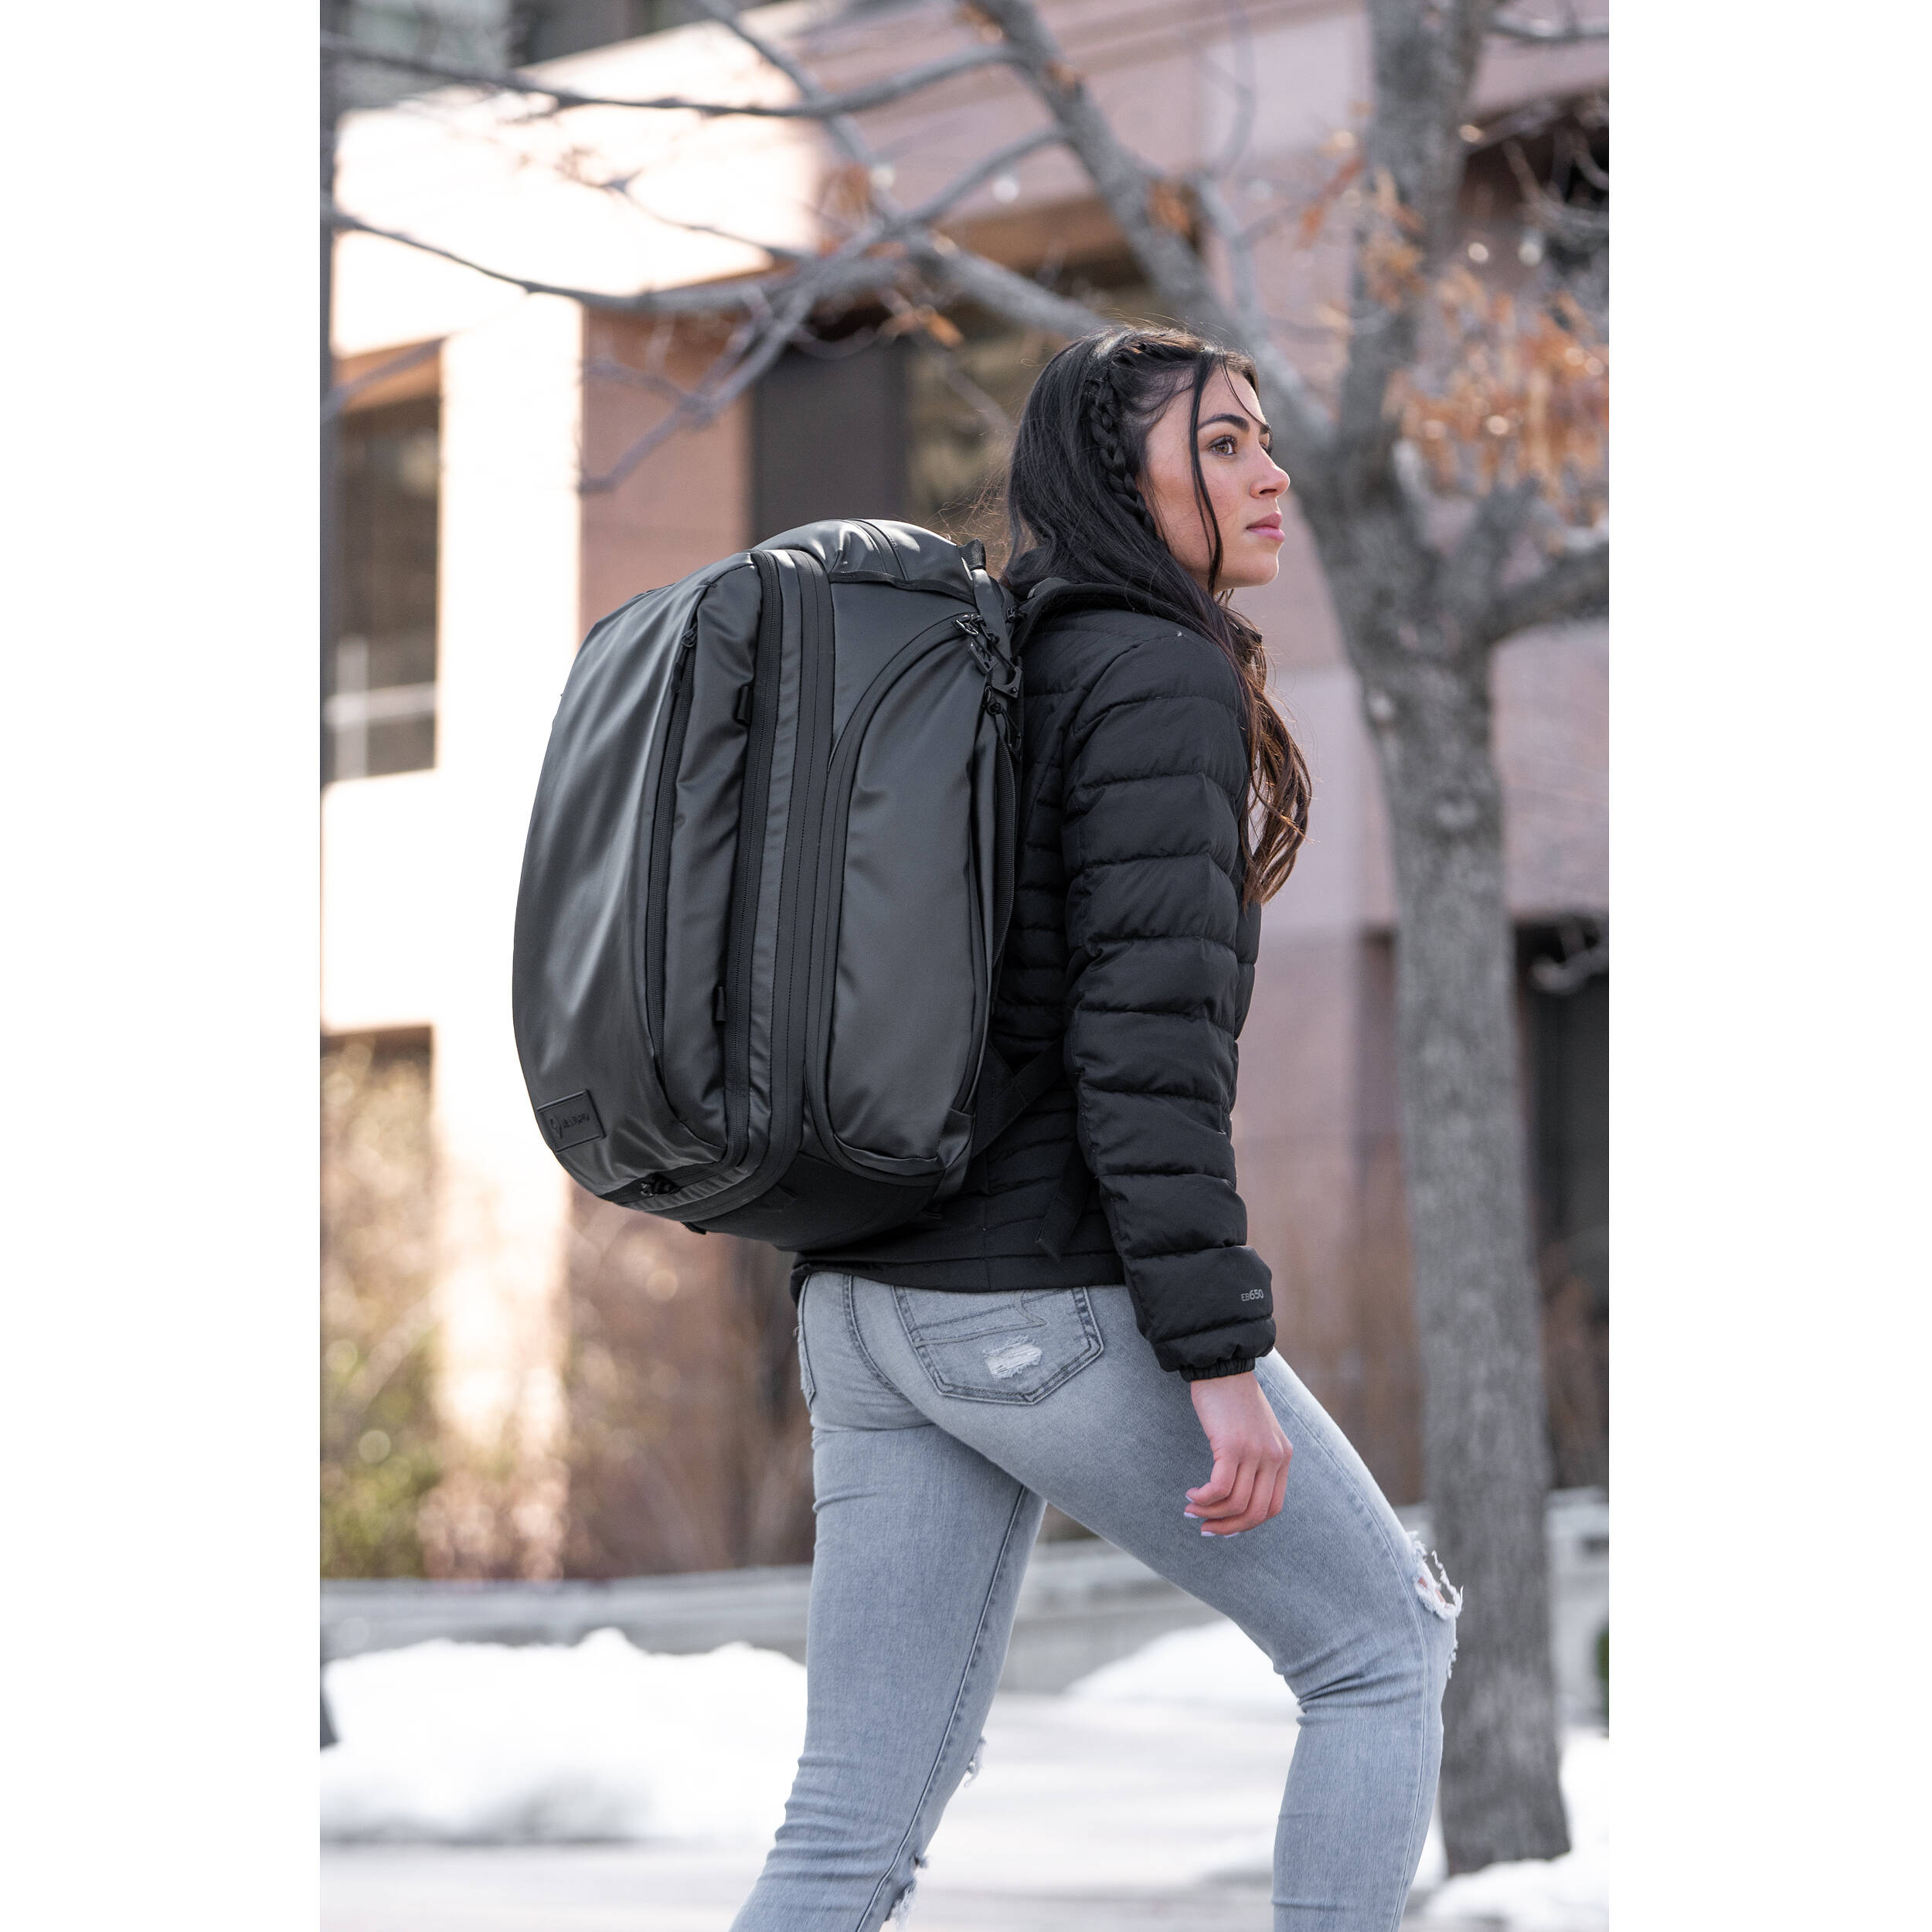 WANDRD Transit Travel Backpack - 45L - Black - with Essential Camera Cube